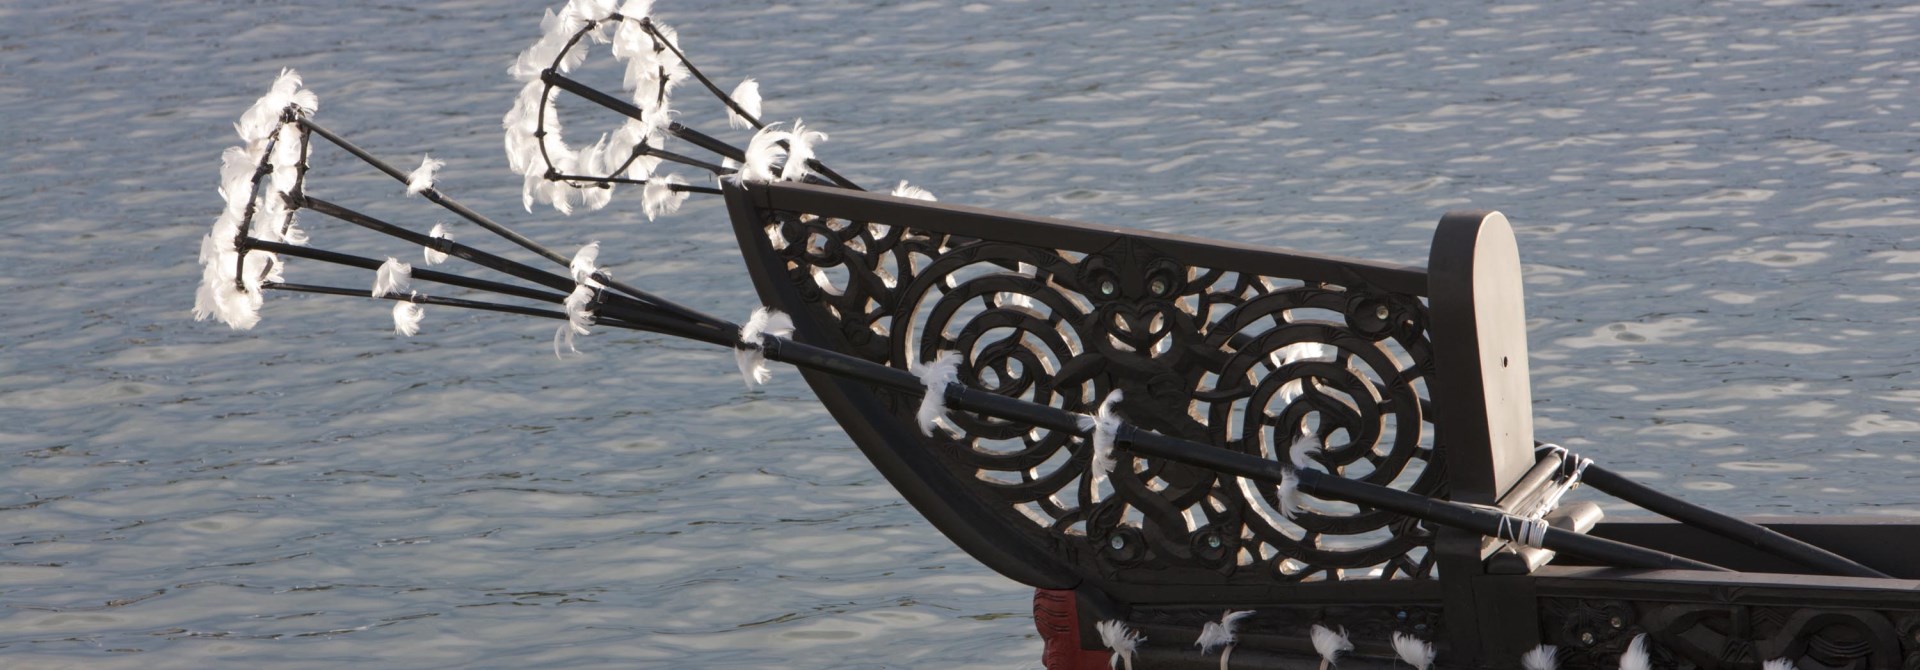 Close up photo of the end of a dark waka on the water with white flowers on the end.